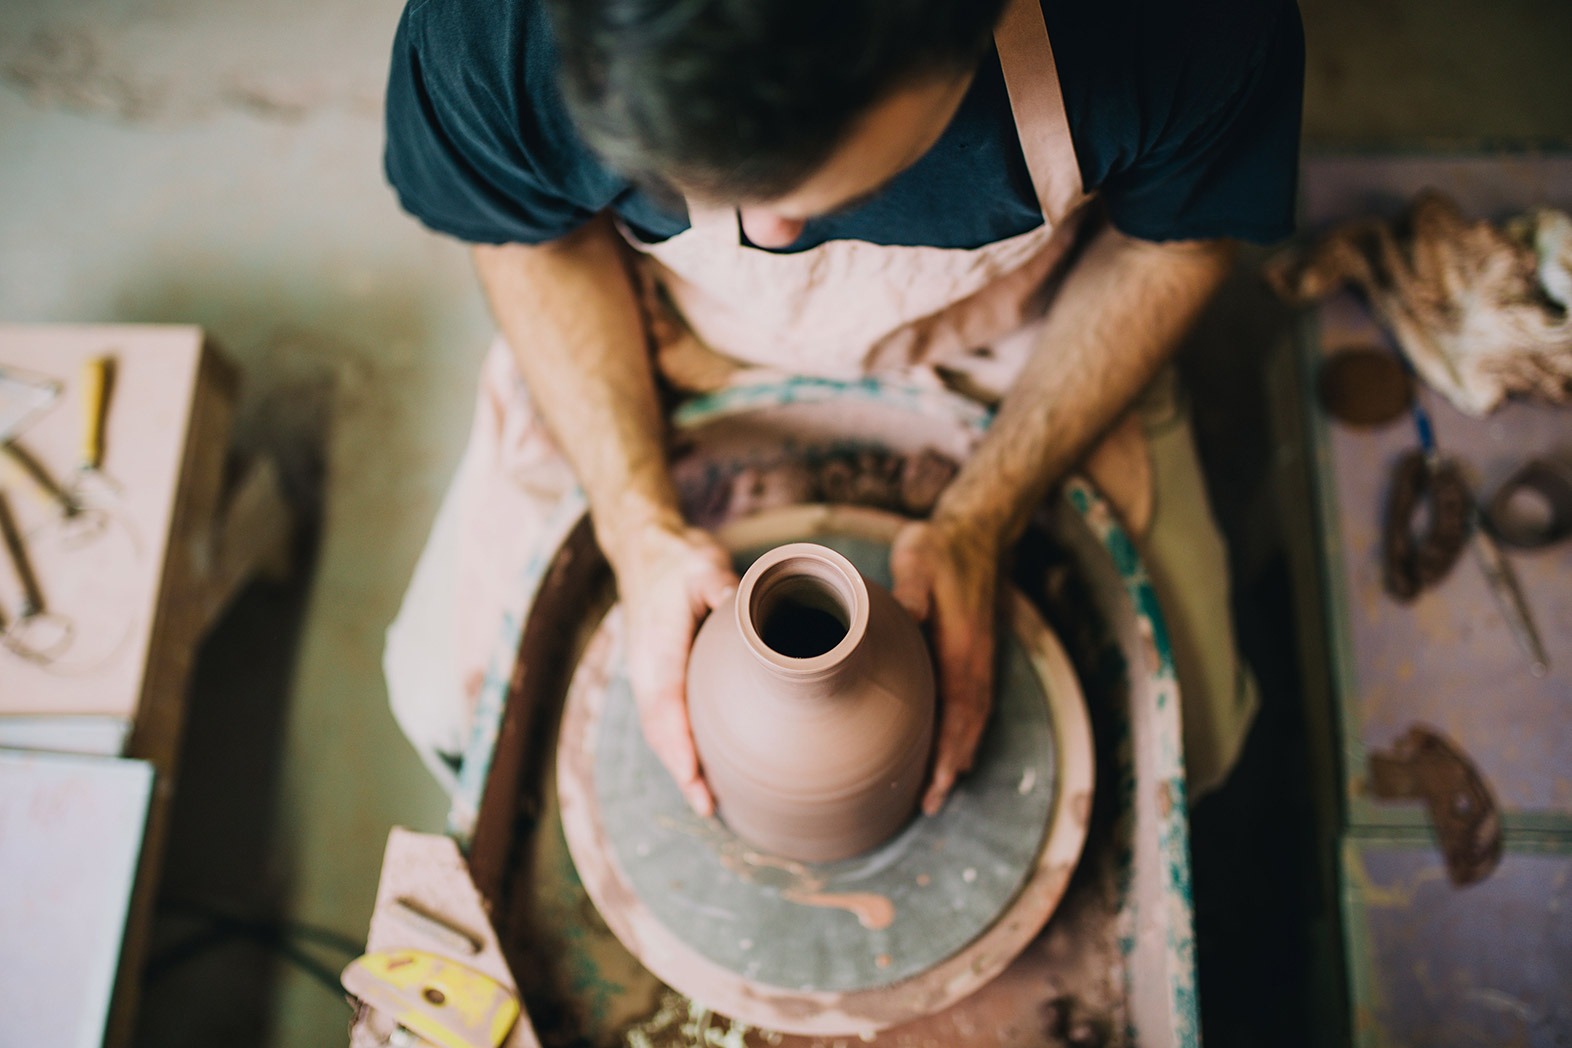 Garyling Ceramic Medium top down shot of man spinning a pottery vase while wearing a apron